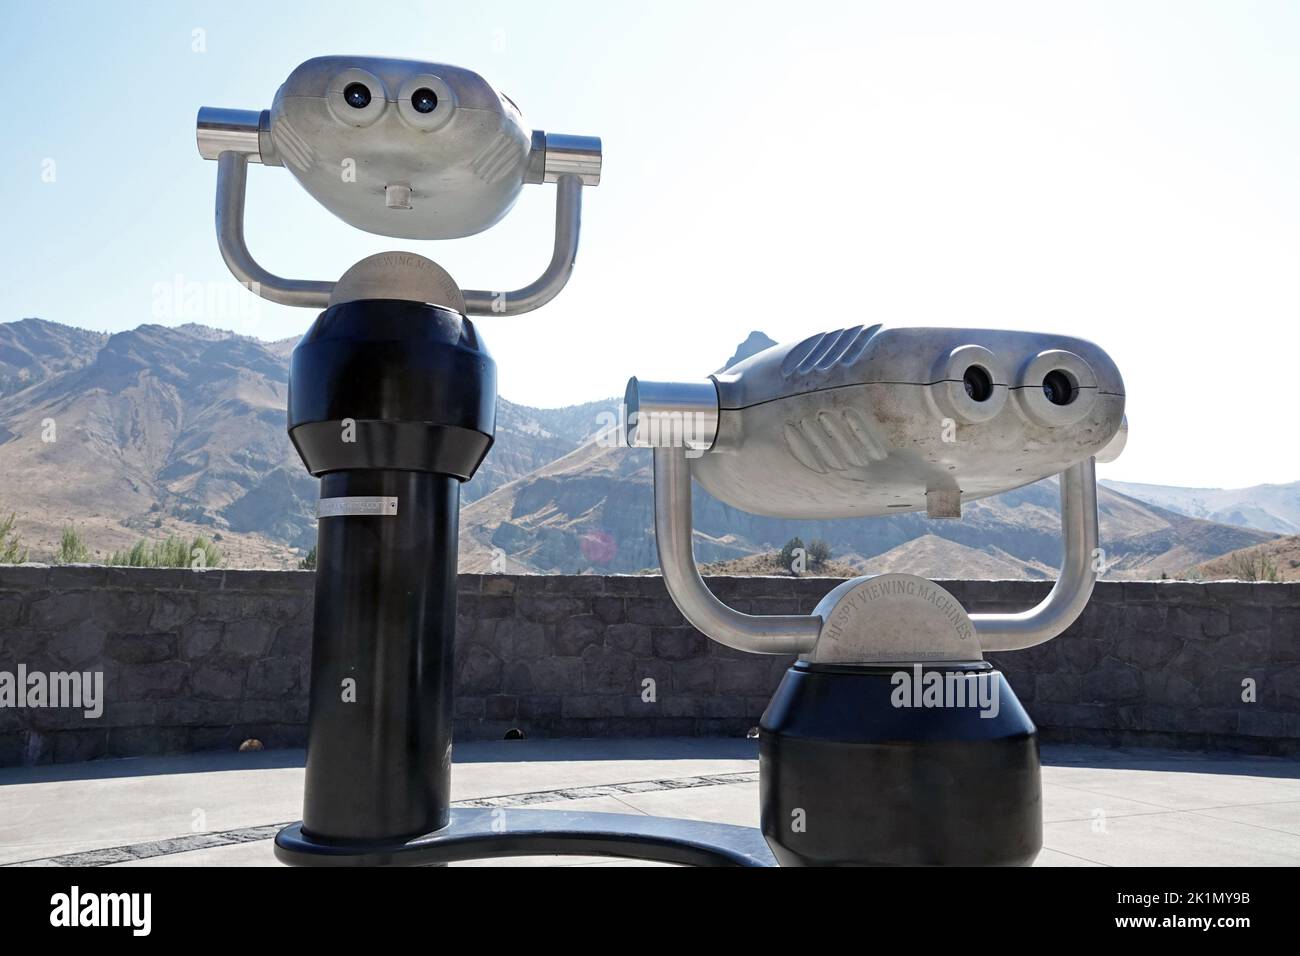 A pair of large binoculars, or viewing machines, at the visitor's center in John Day Fossil Beds National Monument, Sheep Rock Unit, in central Oregon. Stock Photo